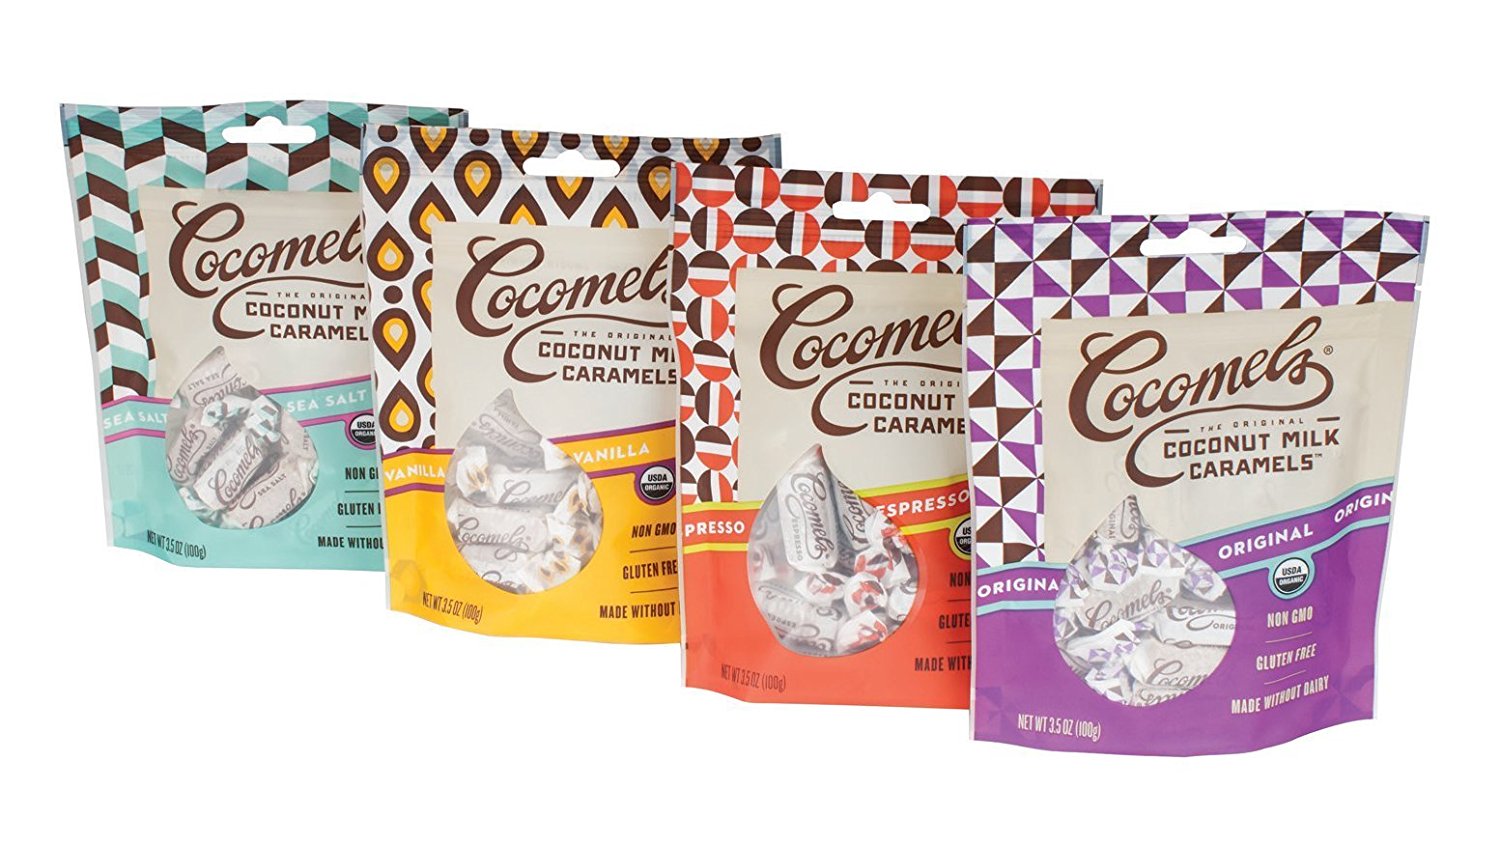 Cocomels Coconut Milk Caramels – Variety Pack – Flavors: Original, Vanilla, Sea Salt, Espresso – Kosher – Made Without Dairy – Organic – Gluten Free – GMO Free – (4 Pack) (3.5 Oz Each)